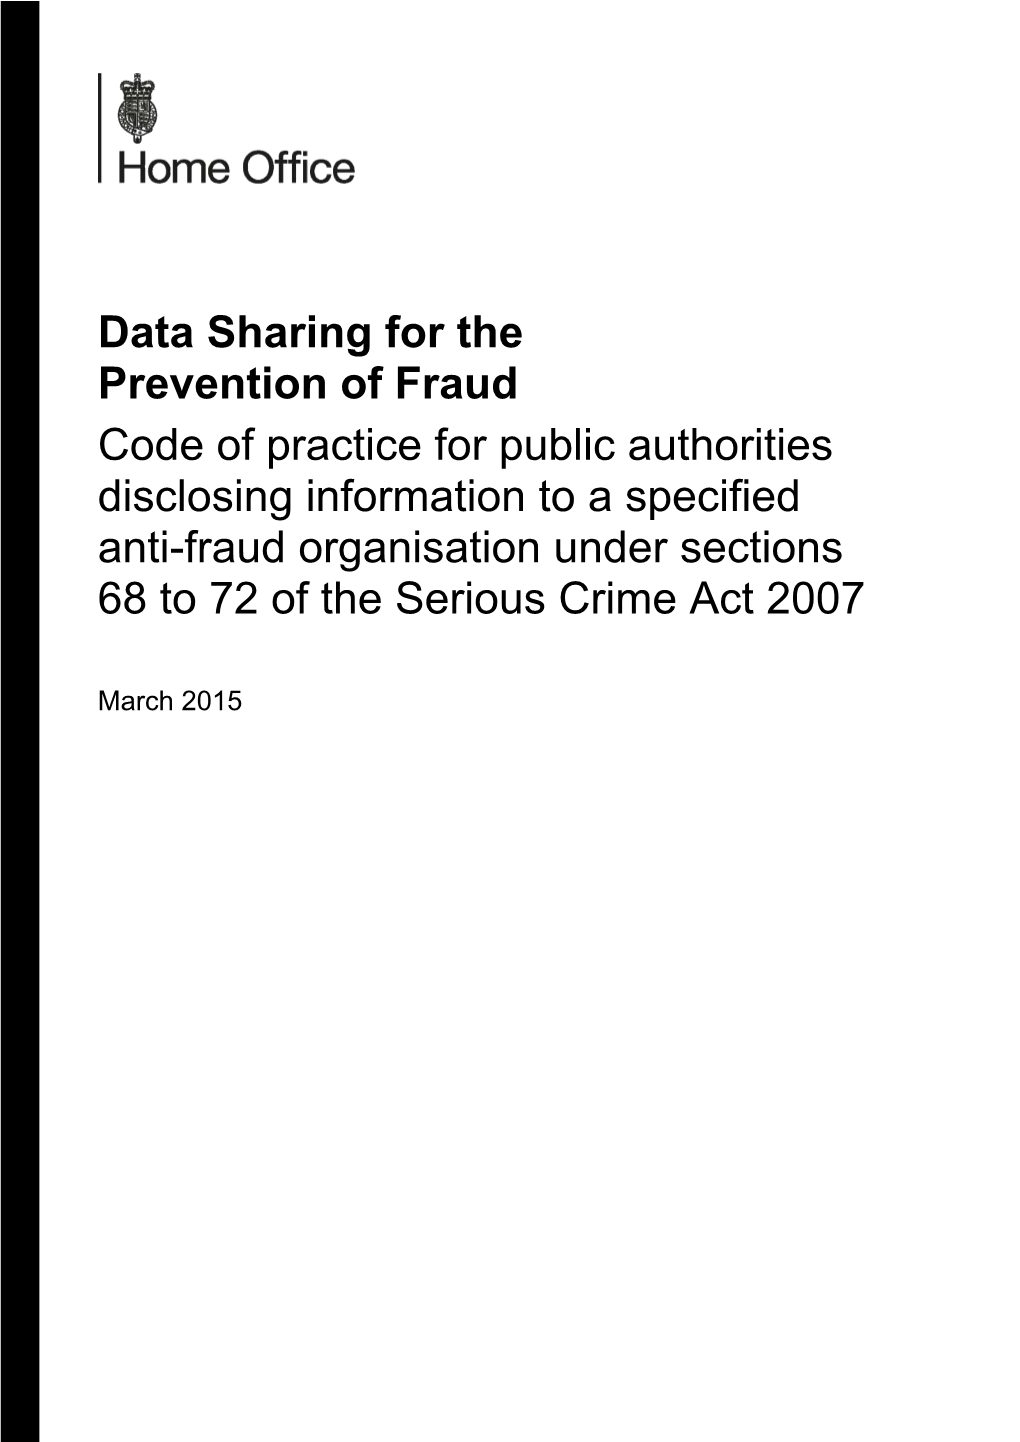 Data Sharing for the Prevention of Fraud